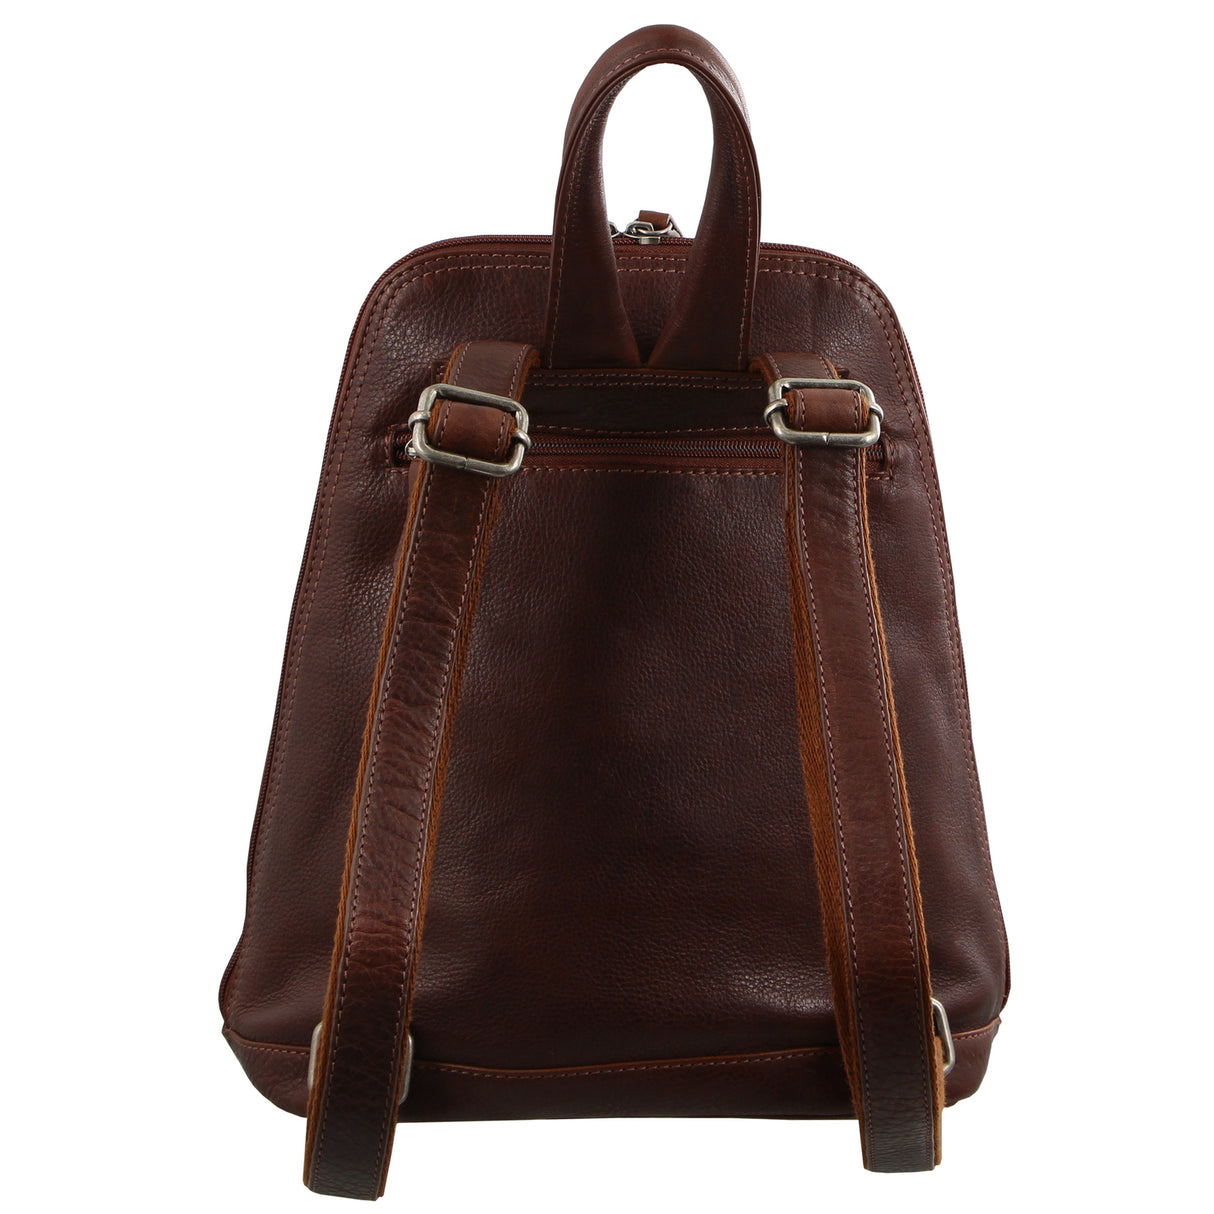 Milleni Womens Bag Italian Leather Soft Nappa Leather Backpack Travel - Chestnut